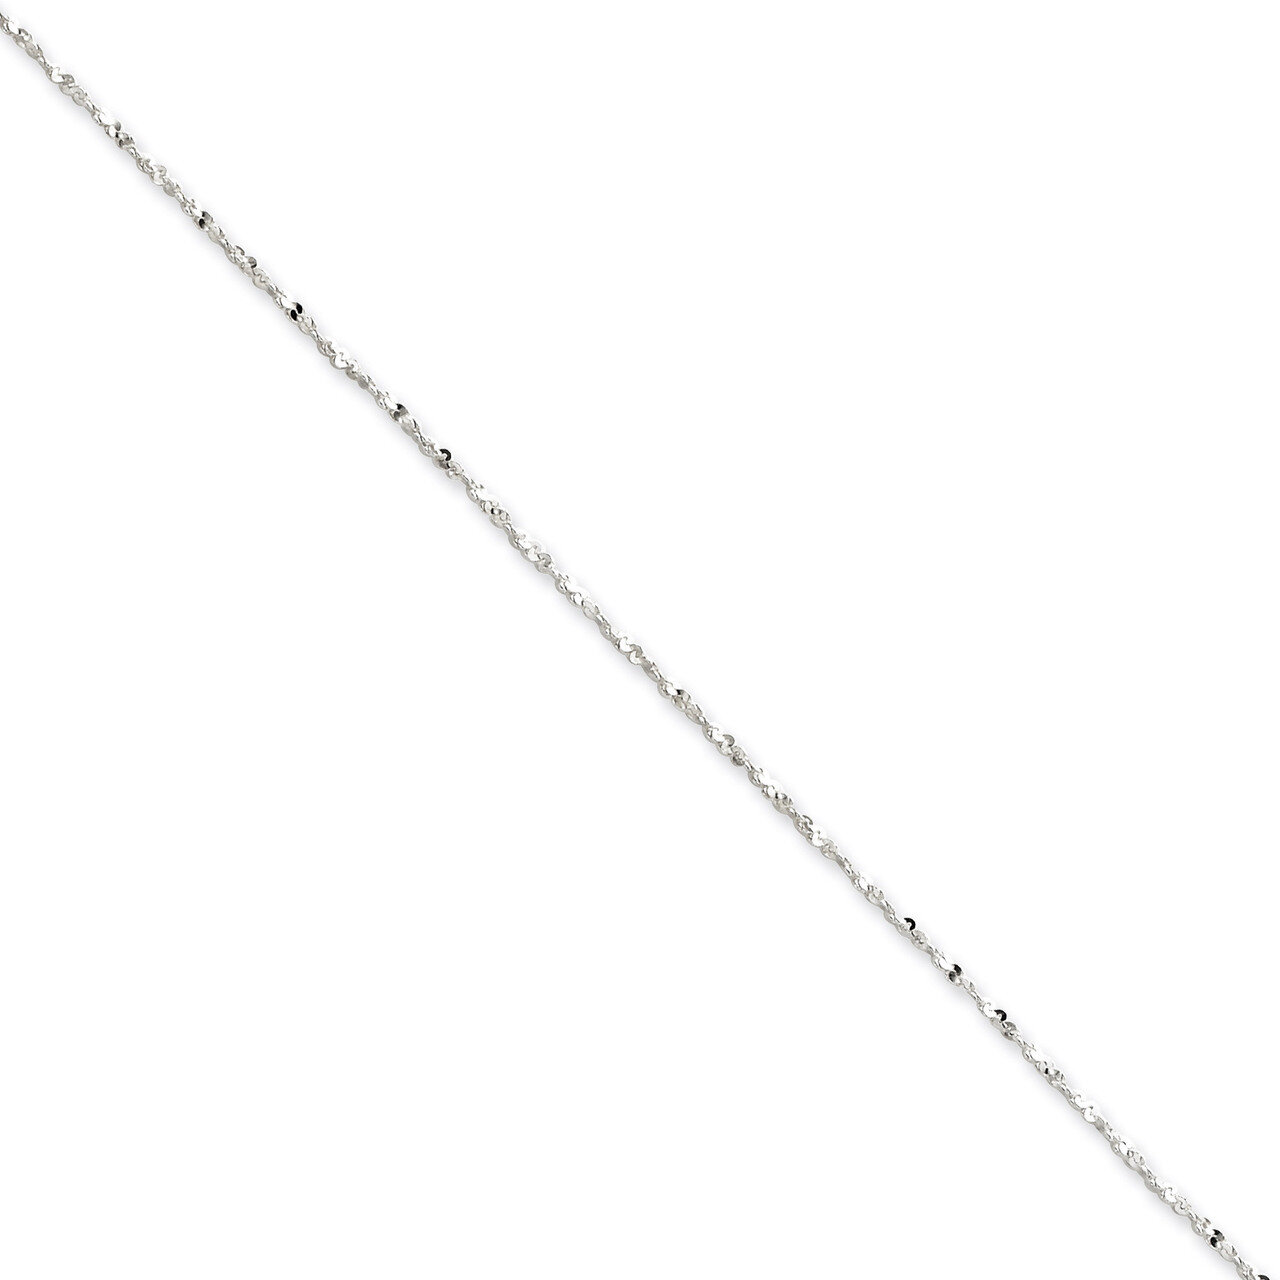 20 Inch 1.2mm Twisted Serpentine Chain Sterling Silver QPEN6-20